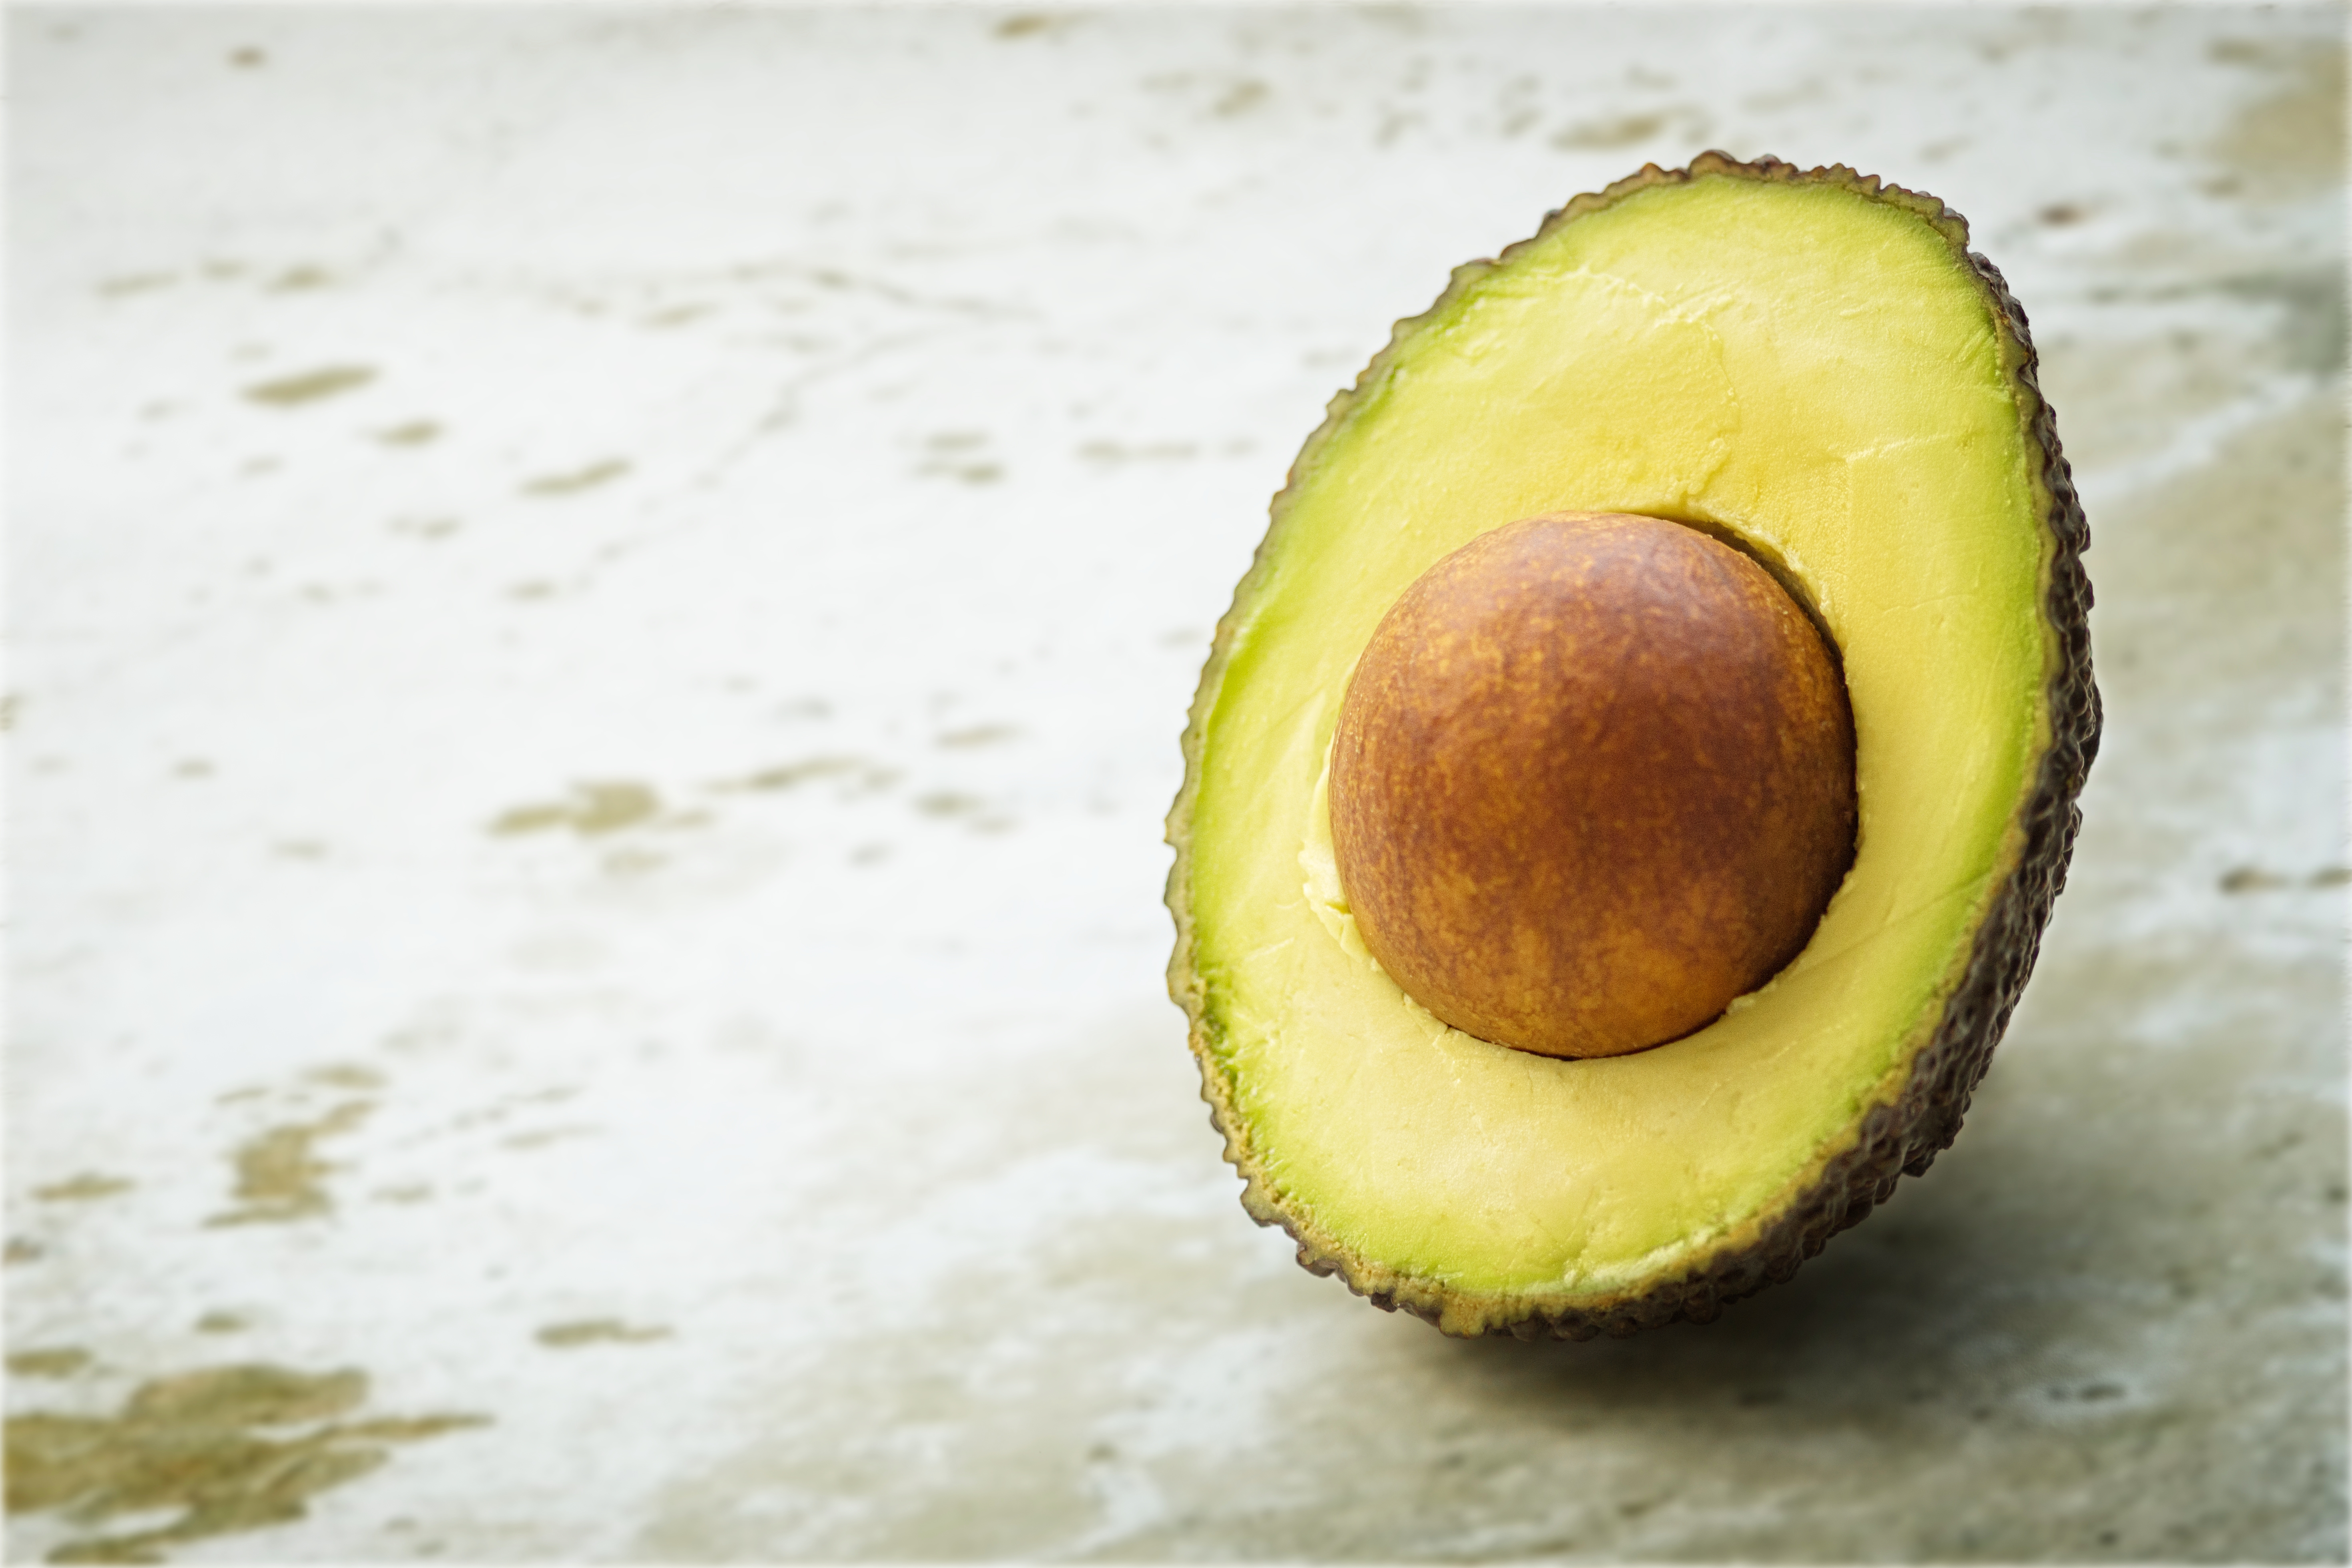 Lose Belly Fat with nutrient-rich foods like avocado